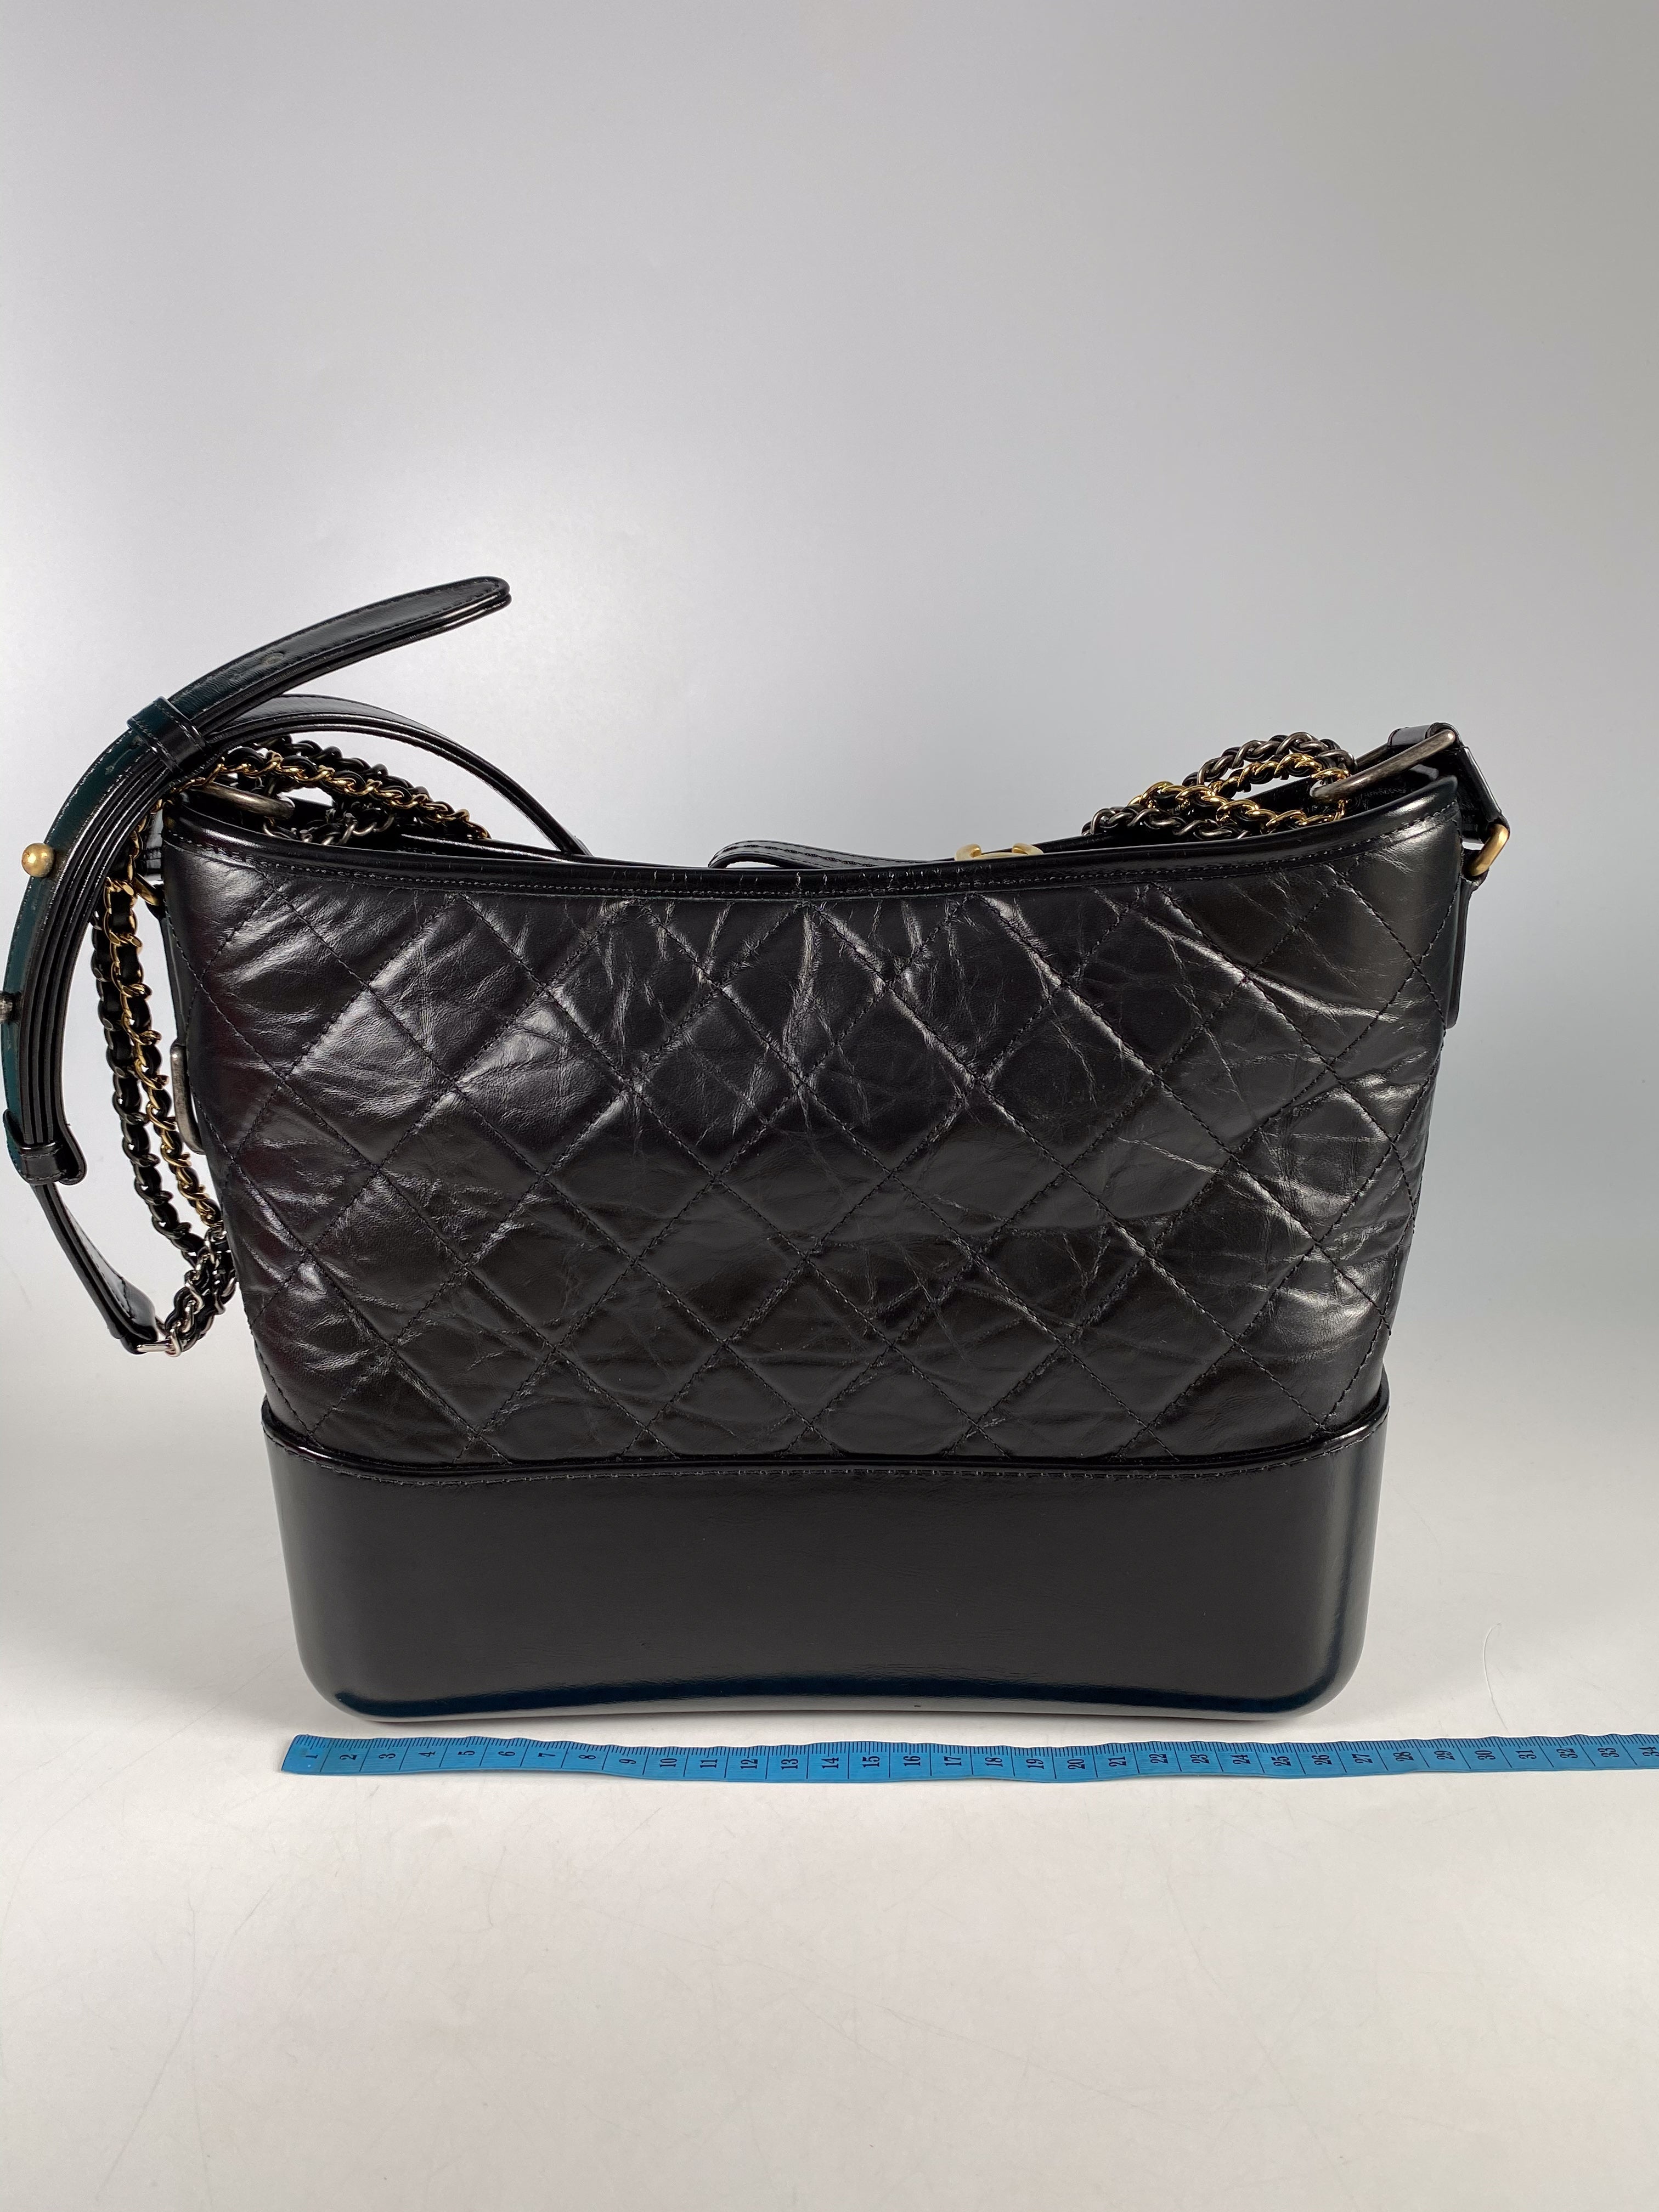 Chanel Gabrielle Old Medium Hobo Bag in Black Distressed Calfskin Leather & Mixed Hardware (Series 25)